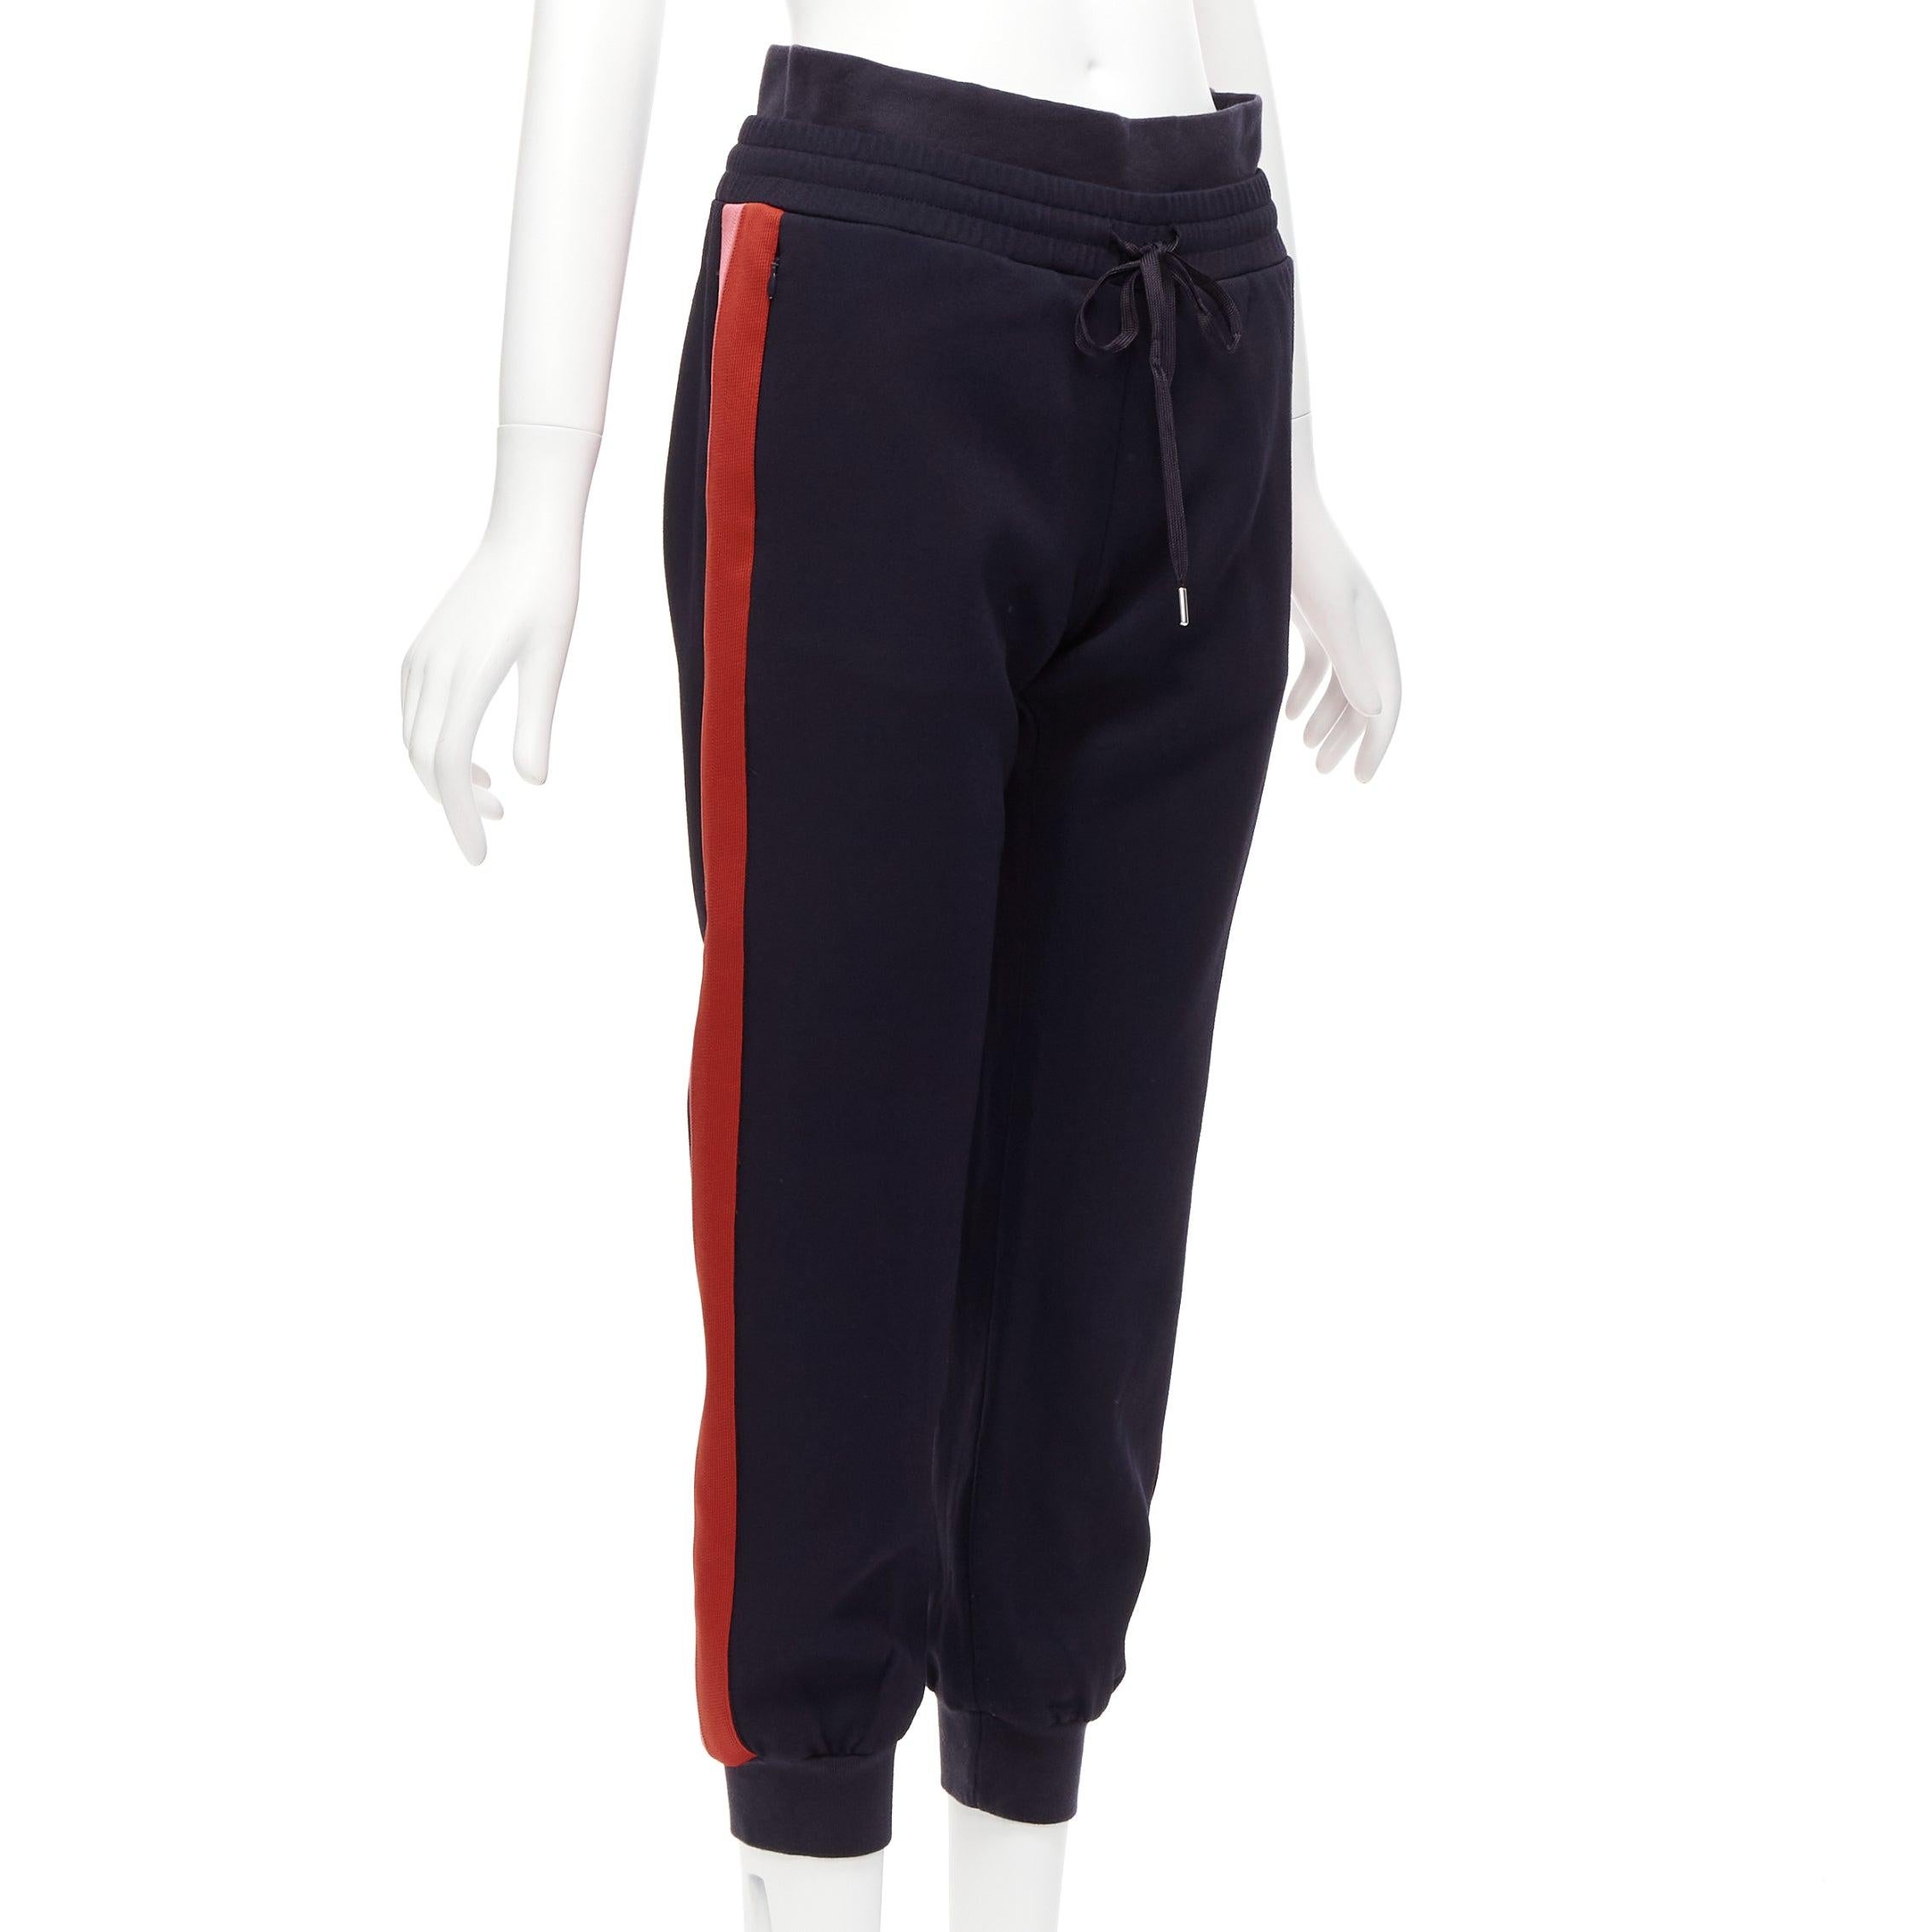 ALEXANDER MCQUEEN 2017 navy pink red double waistband jogger pants IT38 XS
Reference: NKLL/A00055
Brand: Alexander McQueen
Designer: Sarah Burton
Collection: 2017
Material: Viscose, Blend
Color: Navy, Pink
Pattern: Solid
Closure: Elasticated
Extra